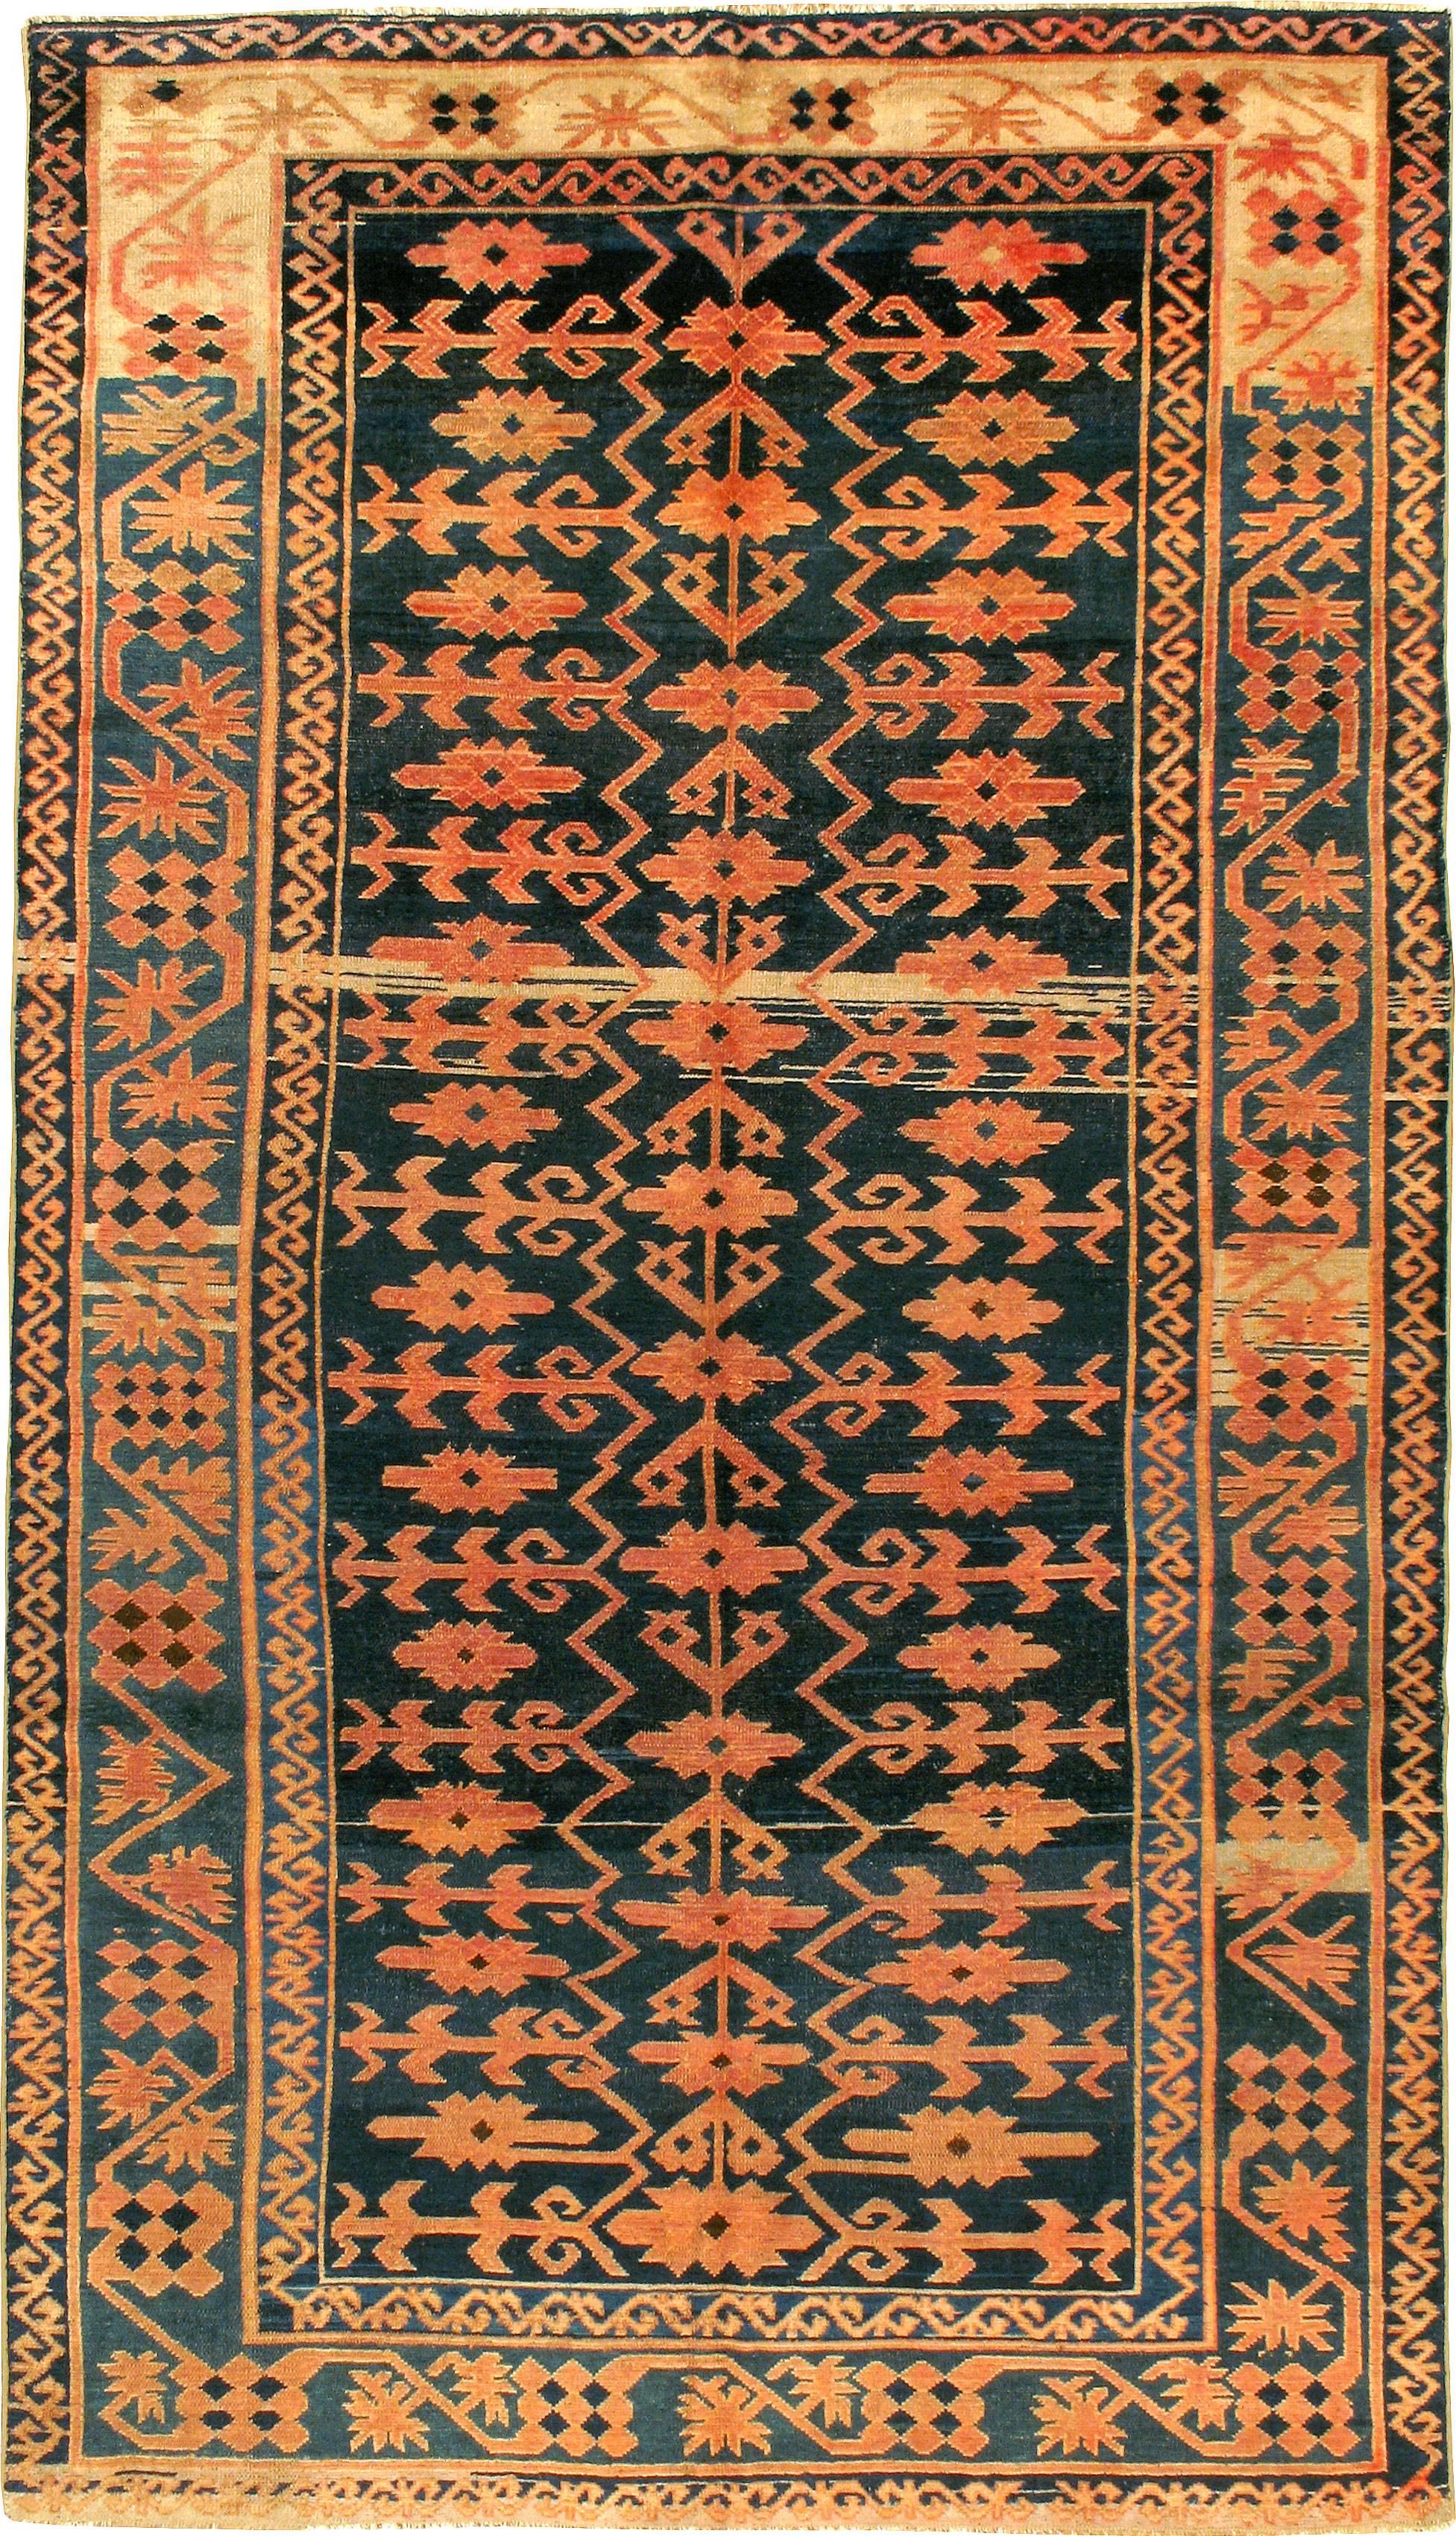 An antique East Turkestan Kirghiz carpet from the turn of the 20th century.